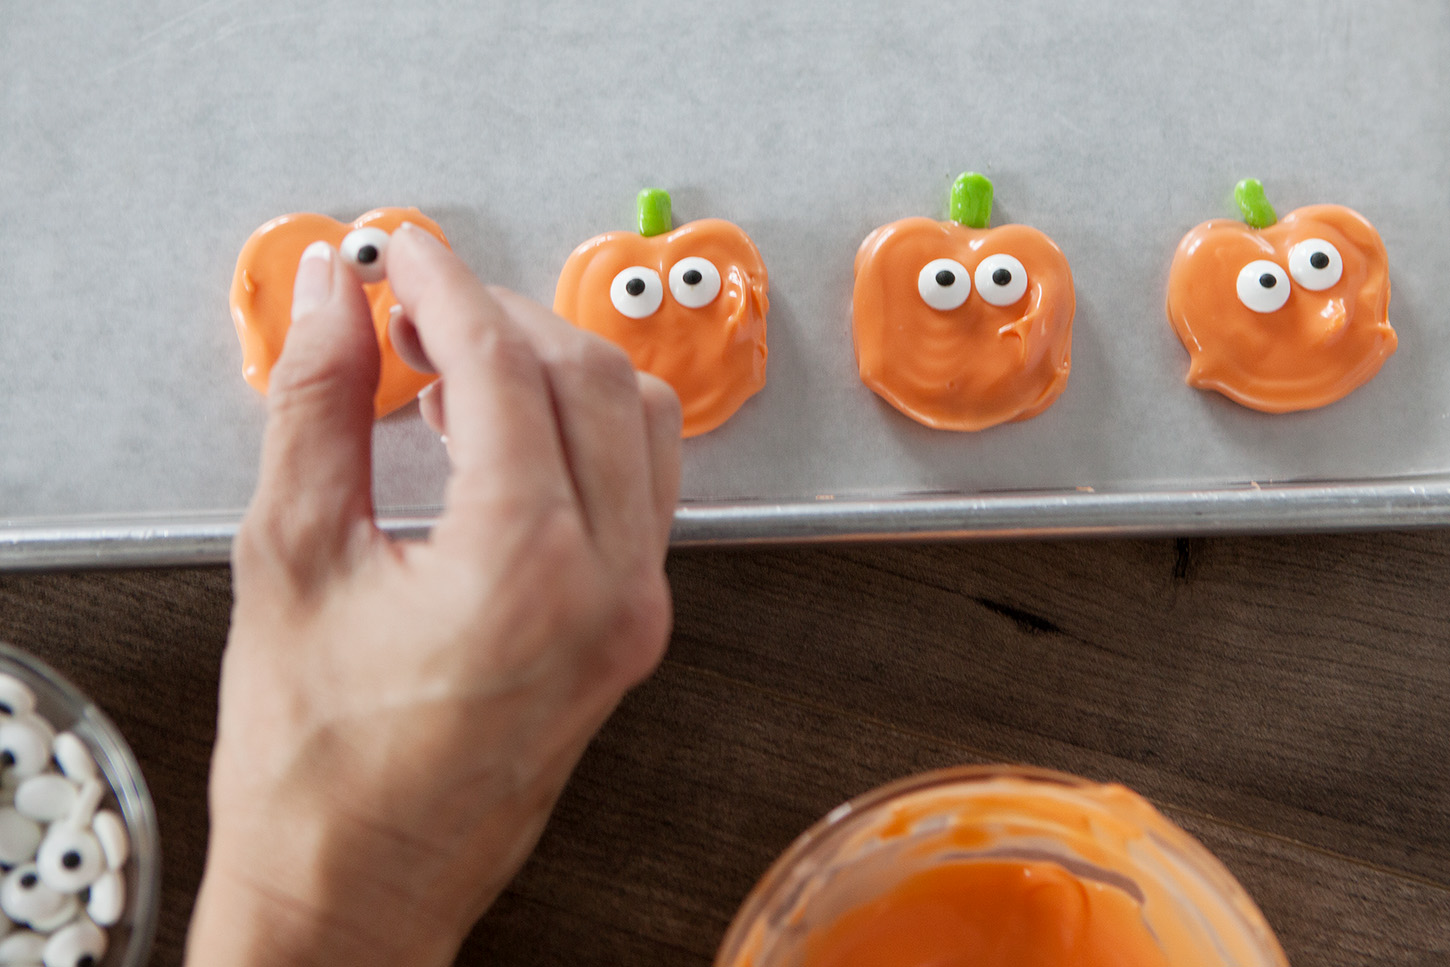 Cute, yummy and a fun treat to make with the kids, these